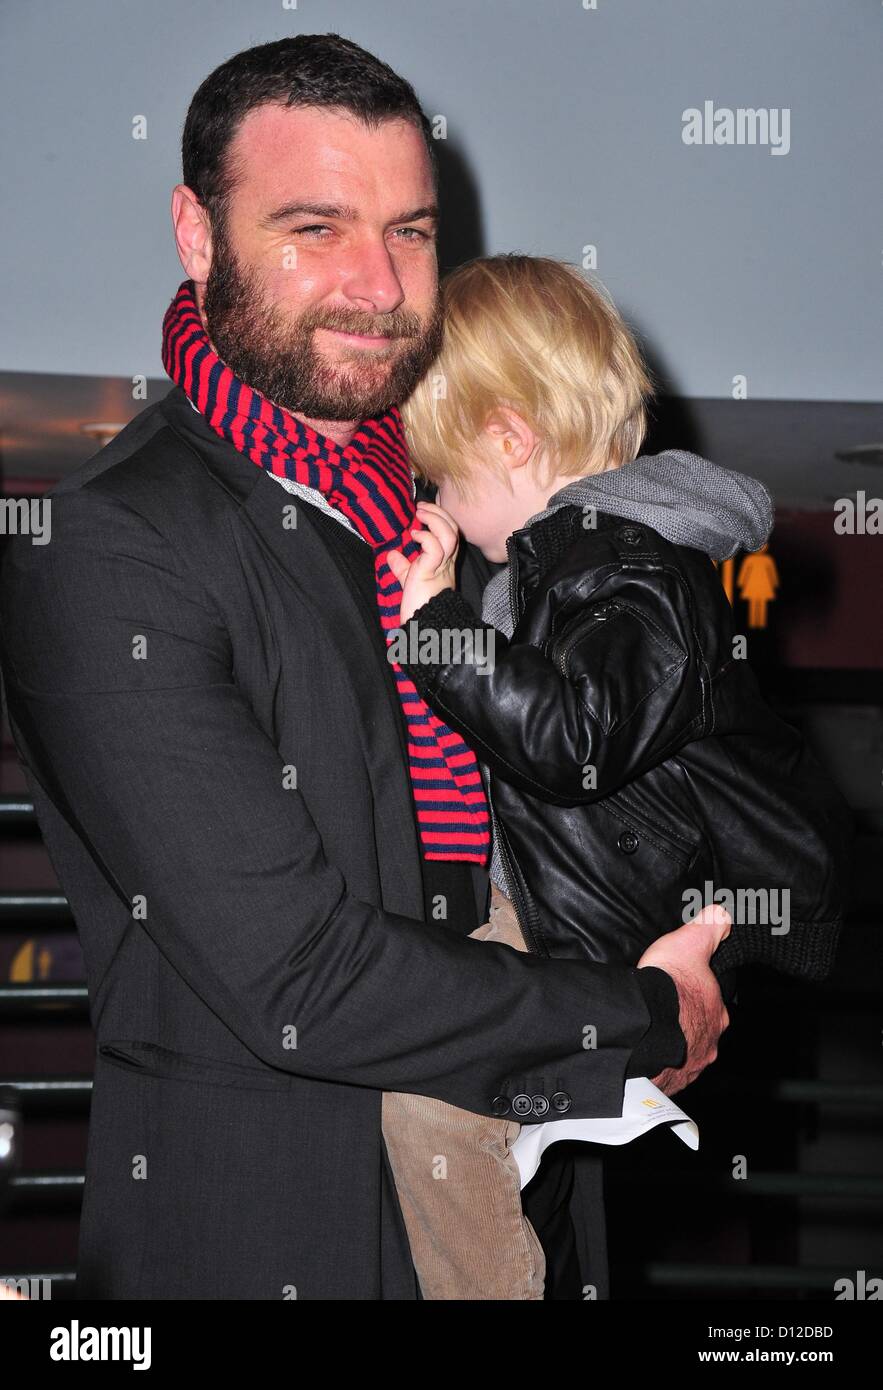 New York, USA. 5th December 2012. Liev Schreiber, Son at arrivals for The New 42nd Street Gala, The New Victory Theater, New York, NY December 5, 2012. Photo By: Gregorio T. Binuya/Everett Collection Stock Photo